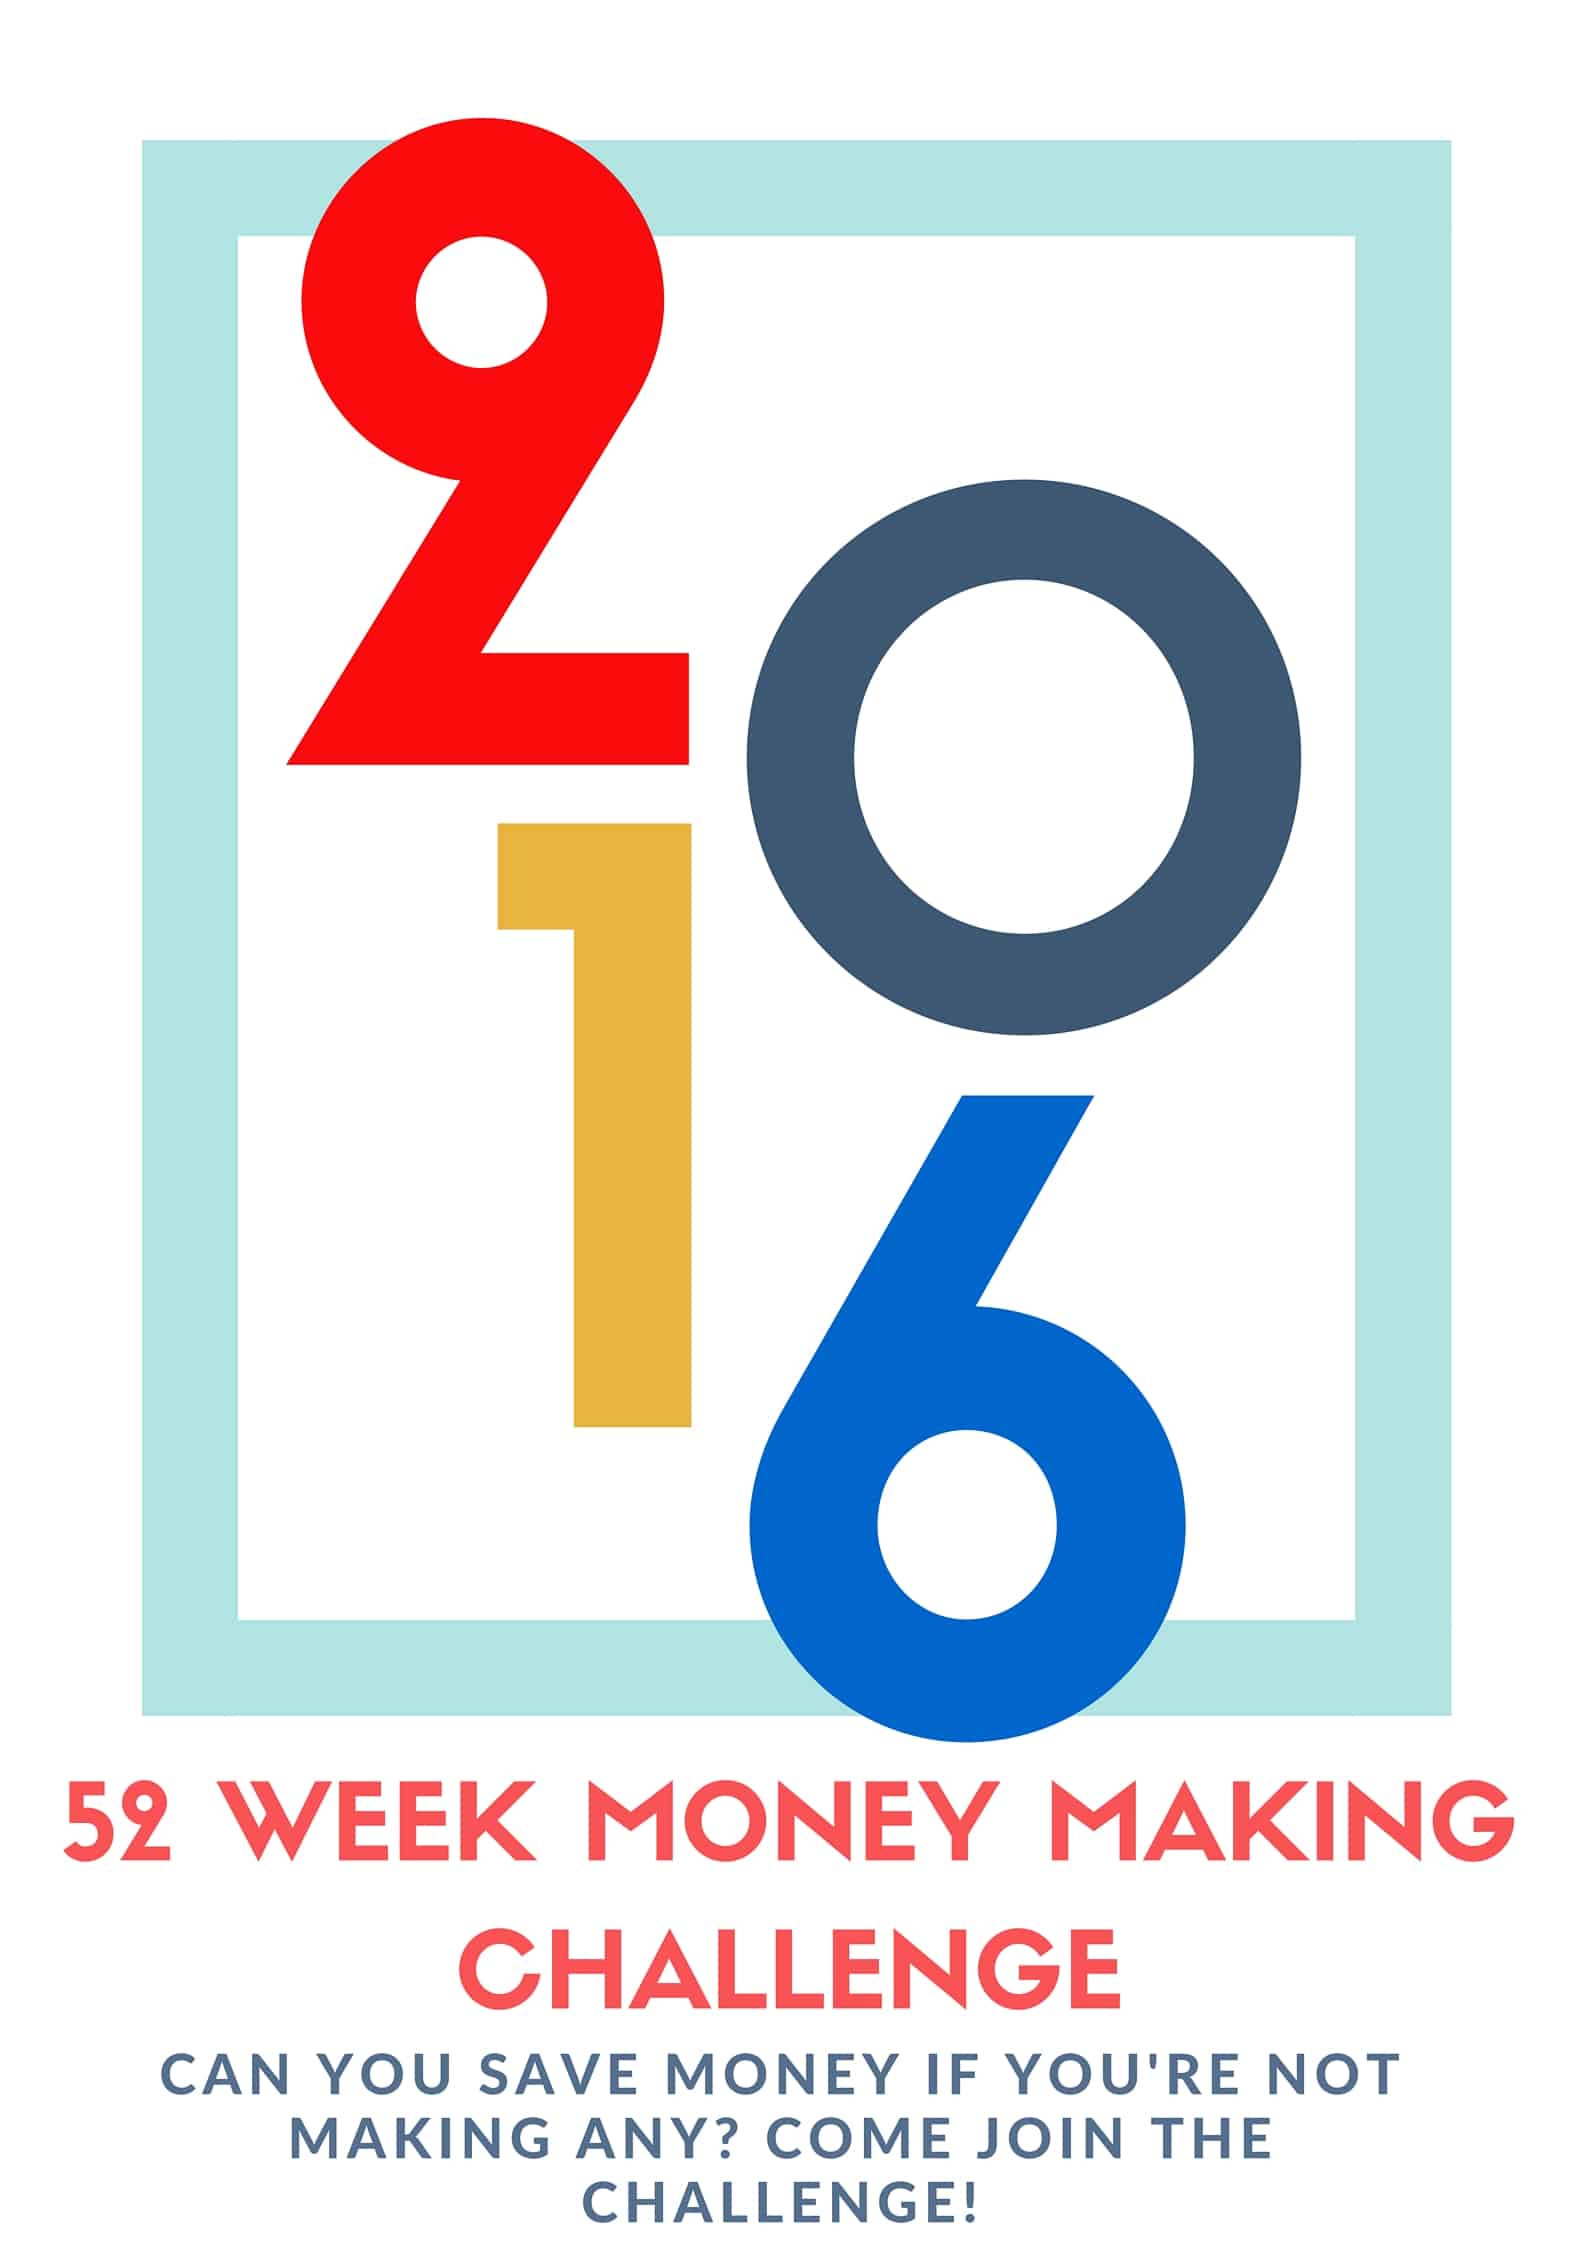 The 52 week money saving challenge is so popular right now,. But I need to MAKE more money in 2016? I can't wait to get going on this 52 Week Money Making Challenge!